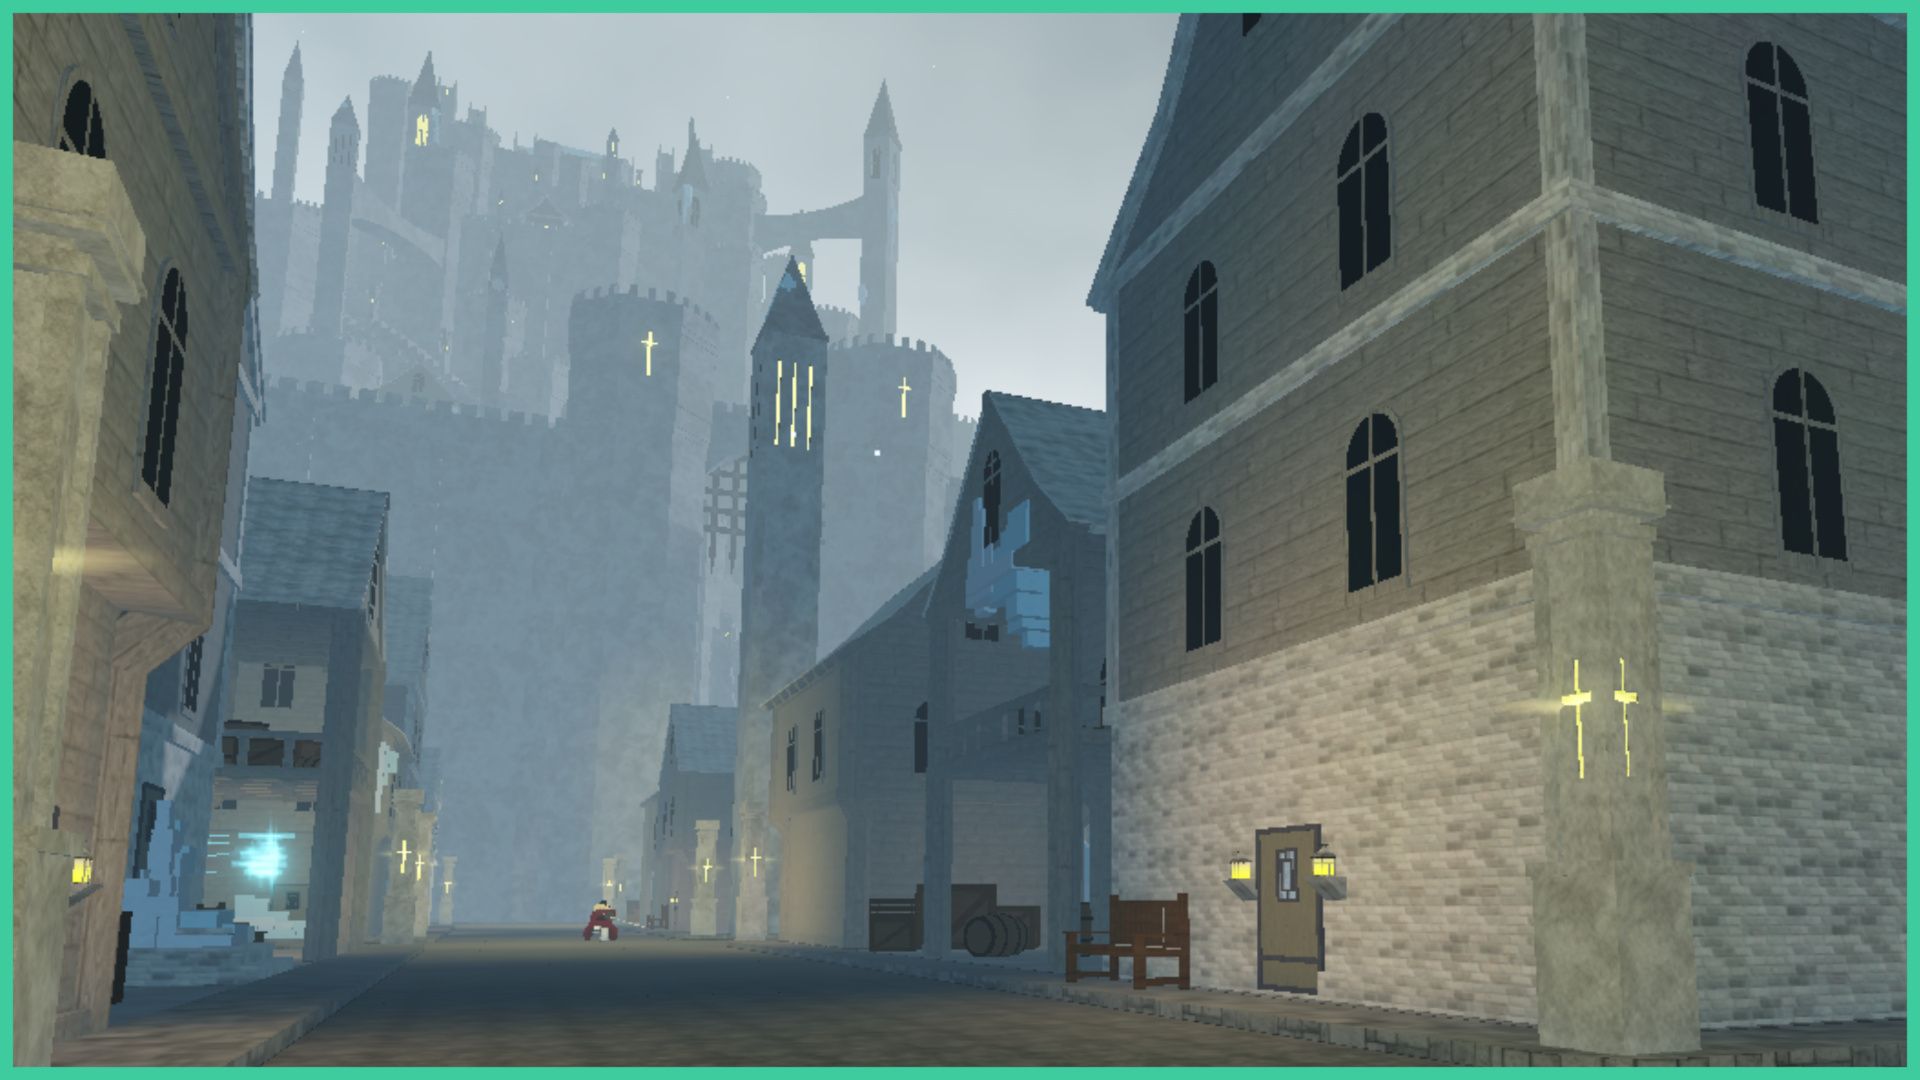 feature image for our type soul quincy accessories guide, the image is a screenshot from the spawn point of wandenreich, as mist covers the tall castle in the distance, and the rest of the town stands quietly , with glowing crosses adorning some of the pillars, there are wooden barrels and a wooden bench on the pavement